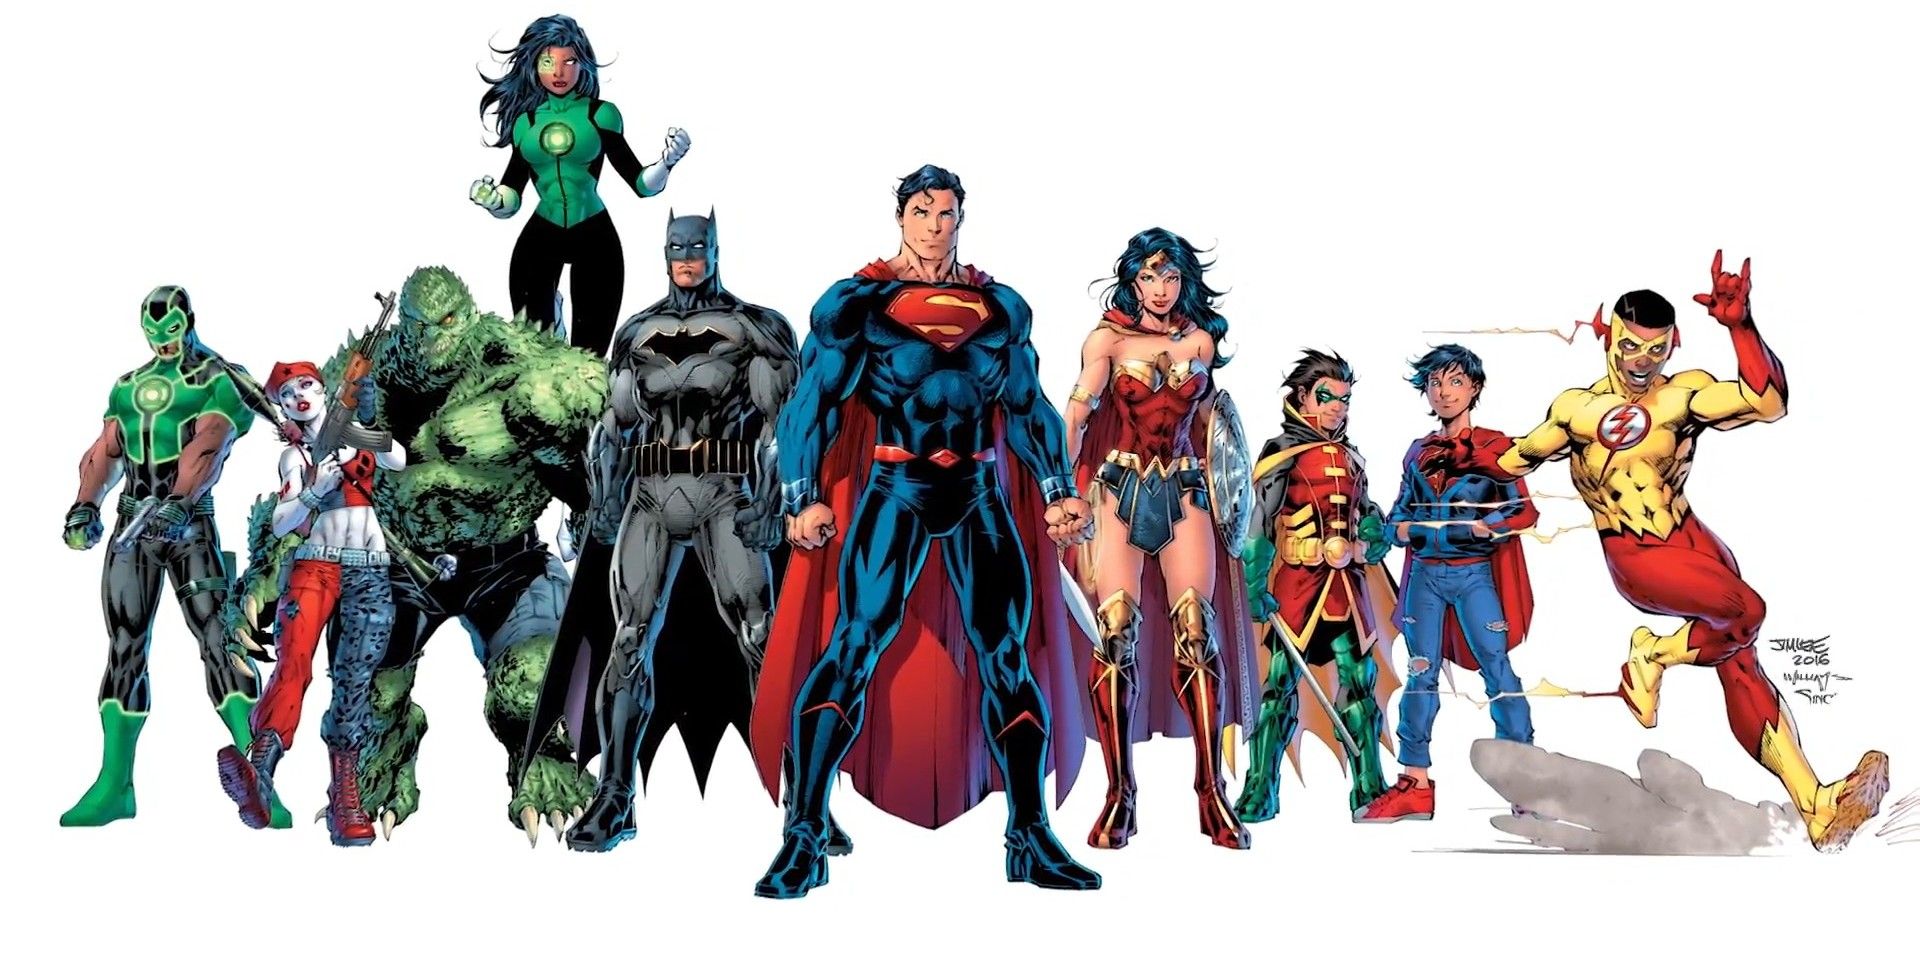 A group of Rebirthed DC characters, by Jim Lee